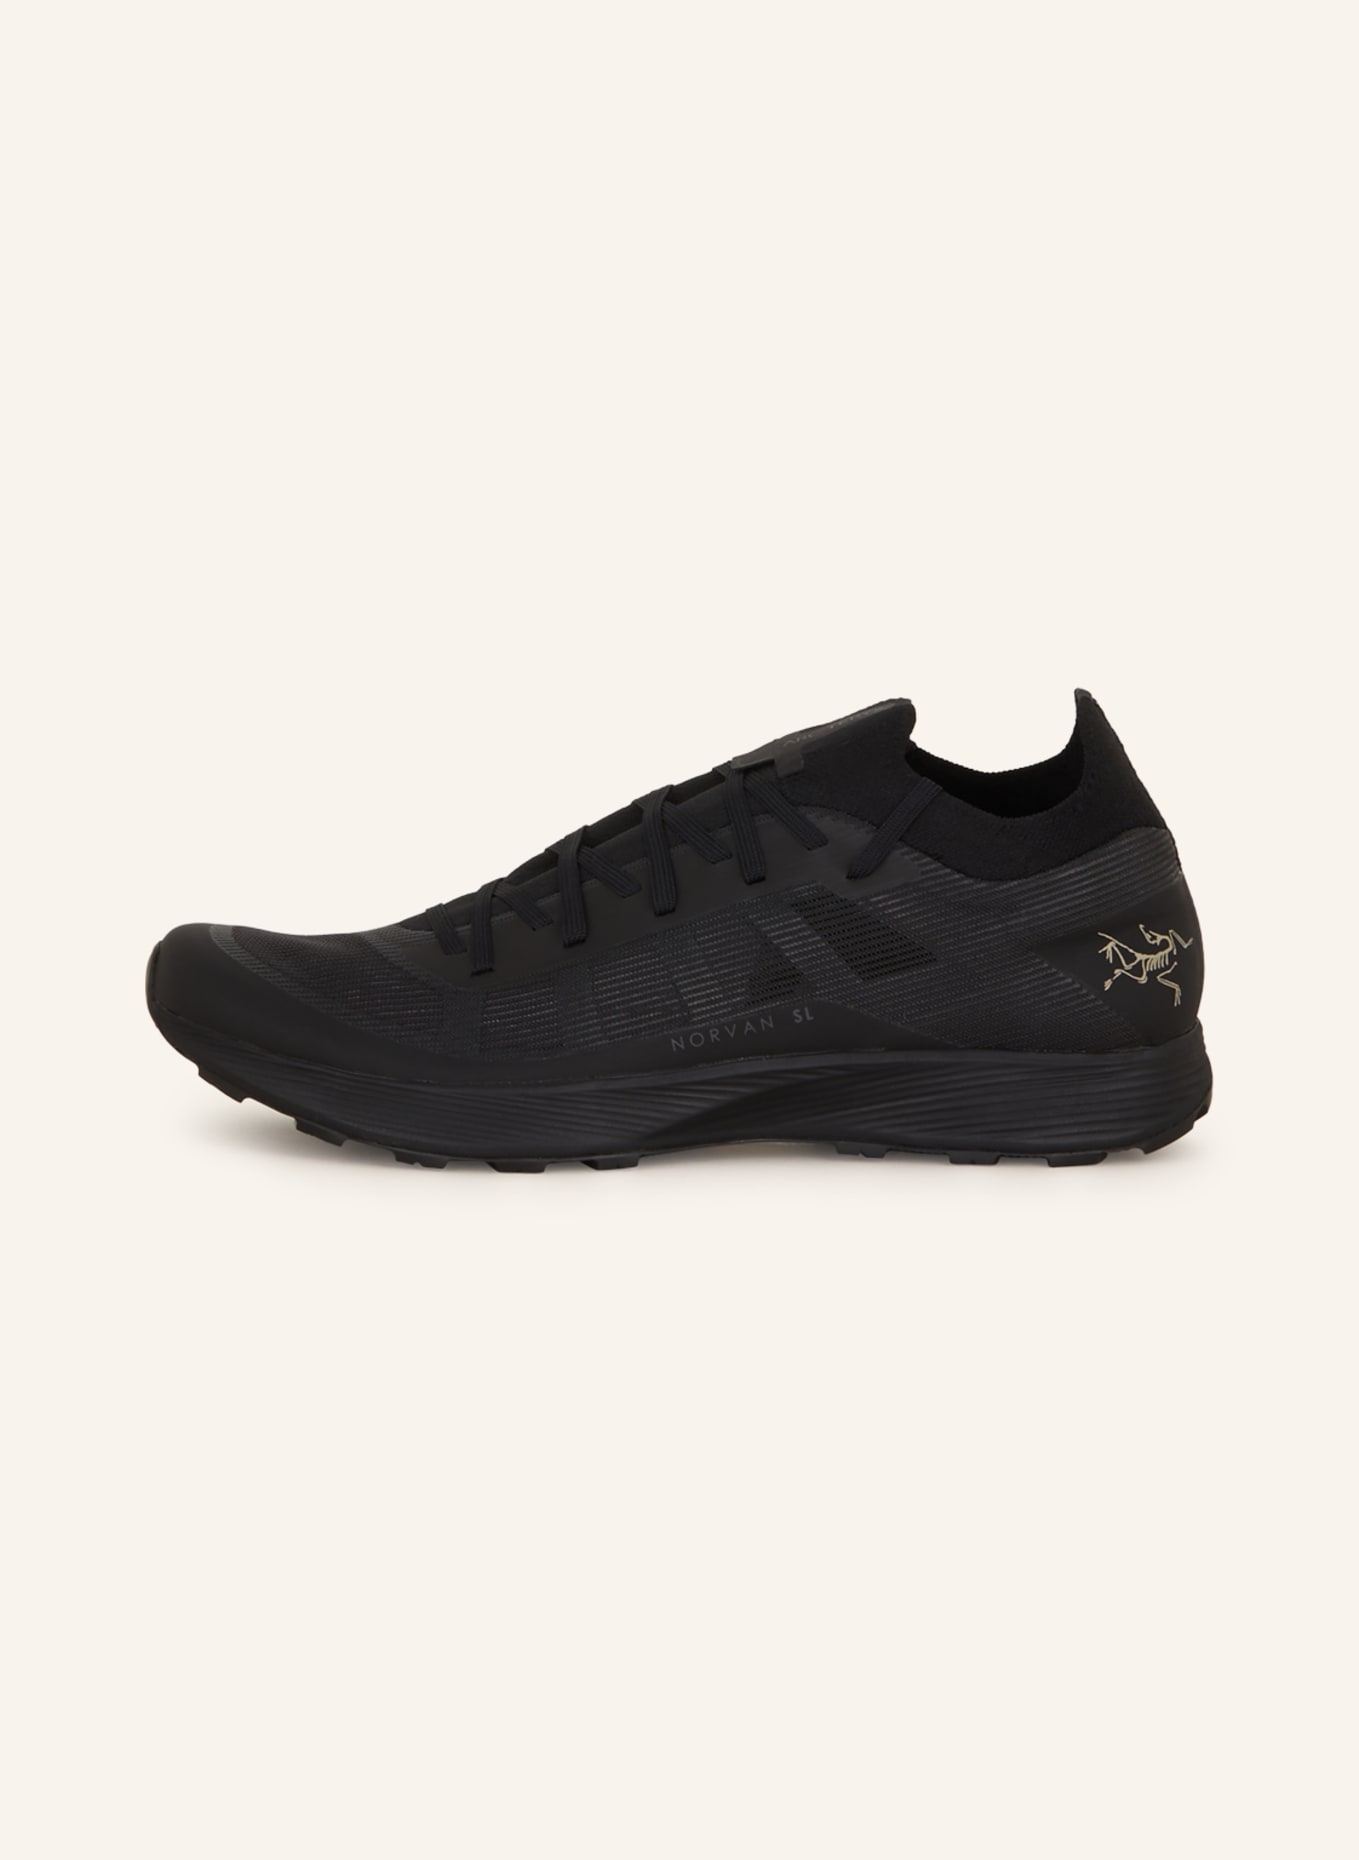 ARC'TERYX Trail running shoes NORVAN SL 3, Color: BLACK (Image 4)